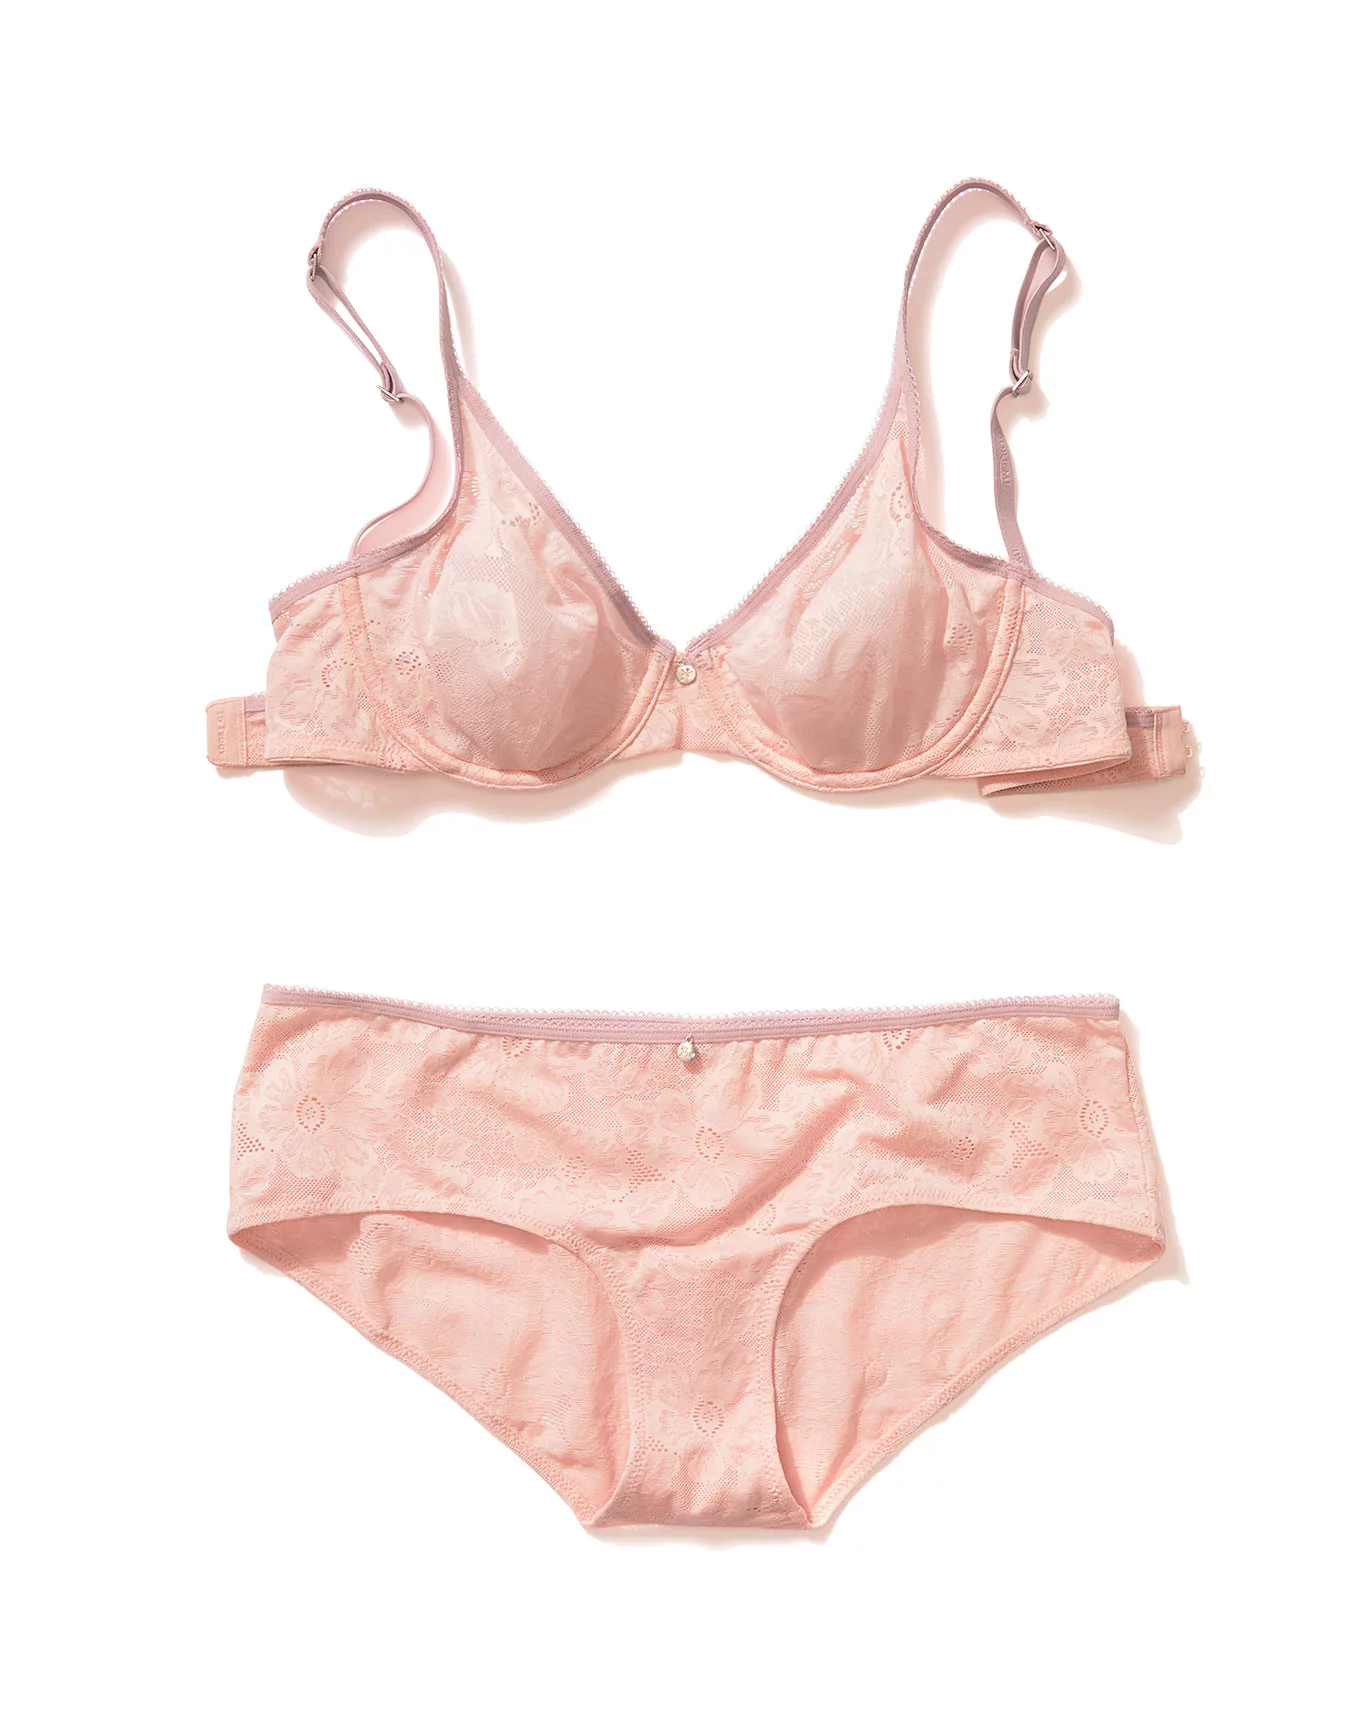 OW Collection Peach Bra Top in Light Rose